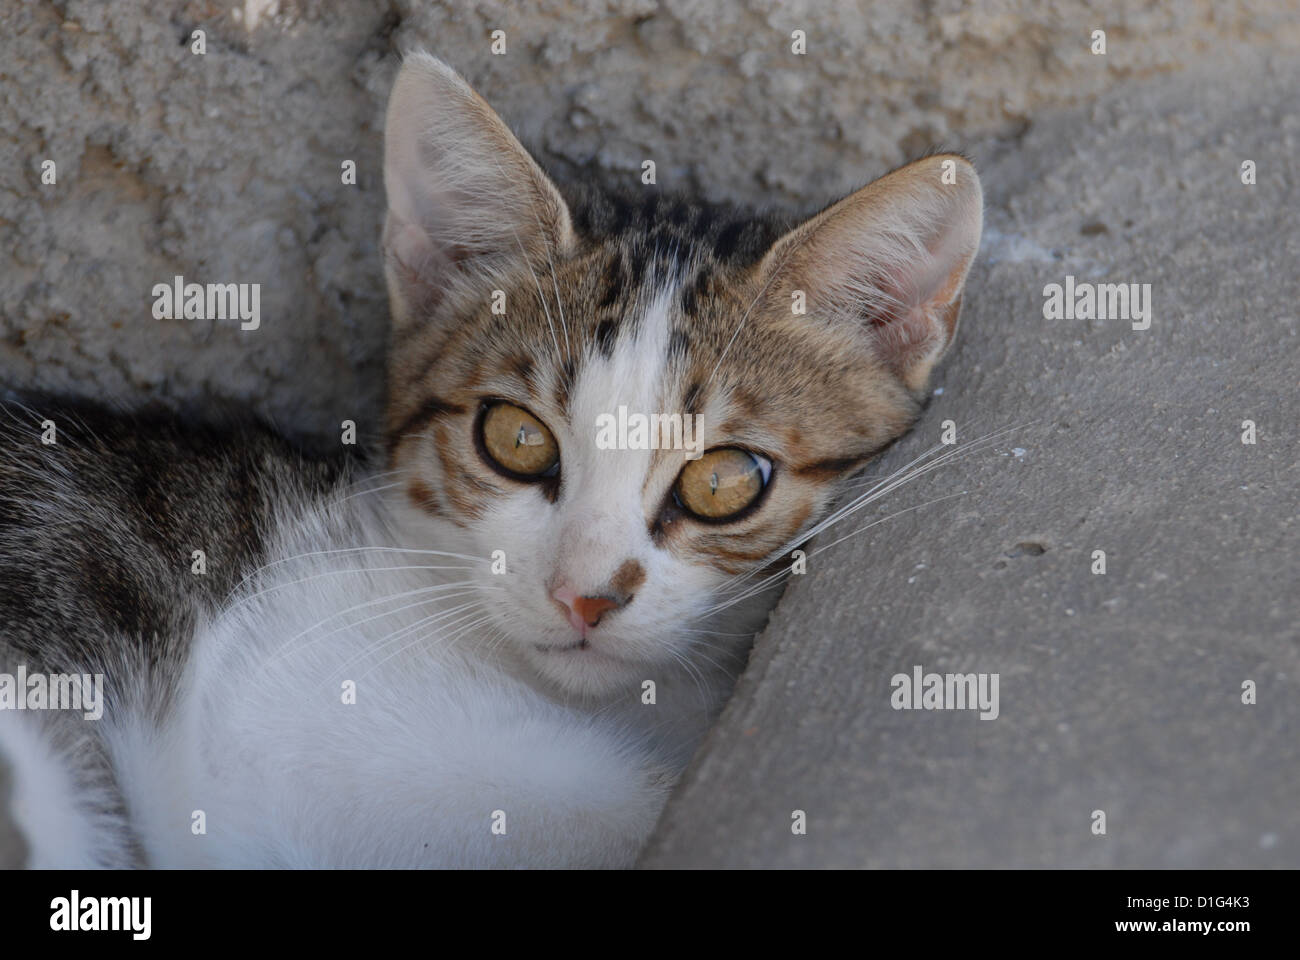 Tabby and White, resting, leaning on a rock, portrait, Greece, Dodecanese Island, Non-pedigree Shorthair, felis silvestris forma Stock Photo